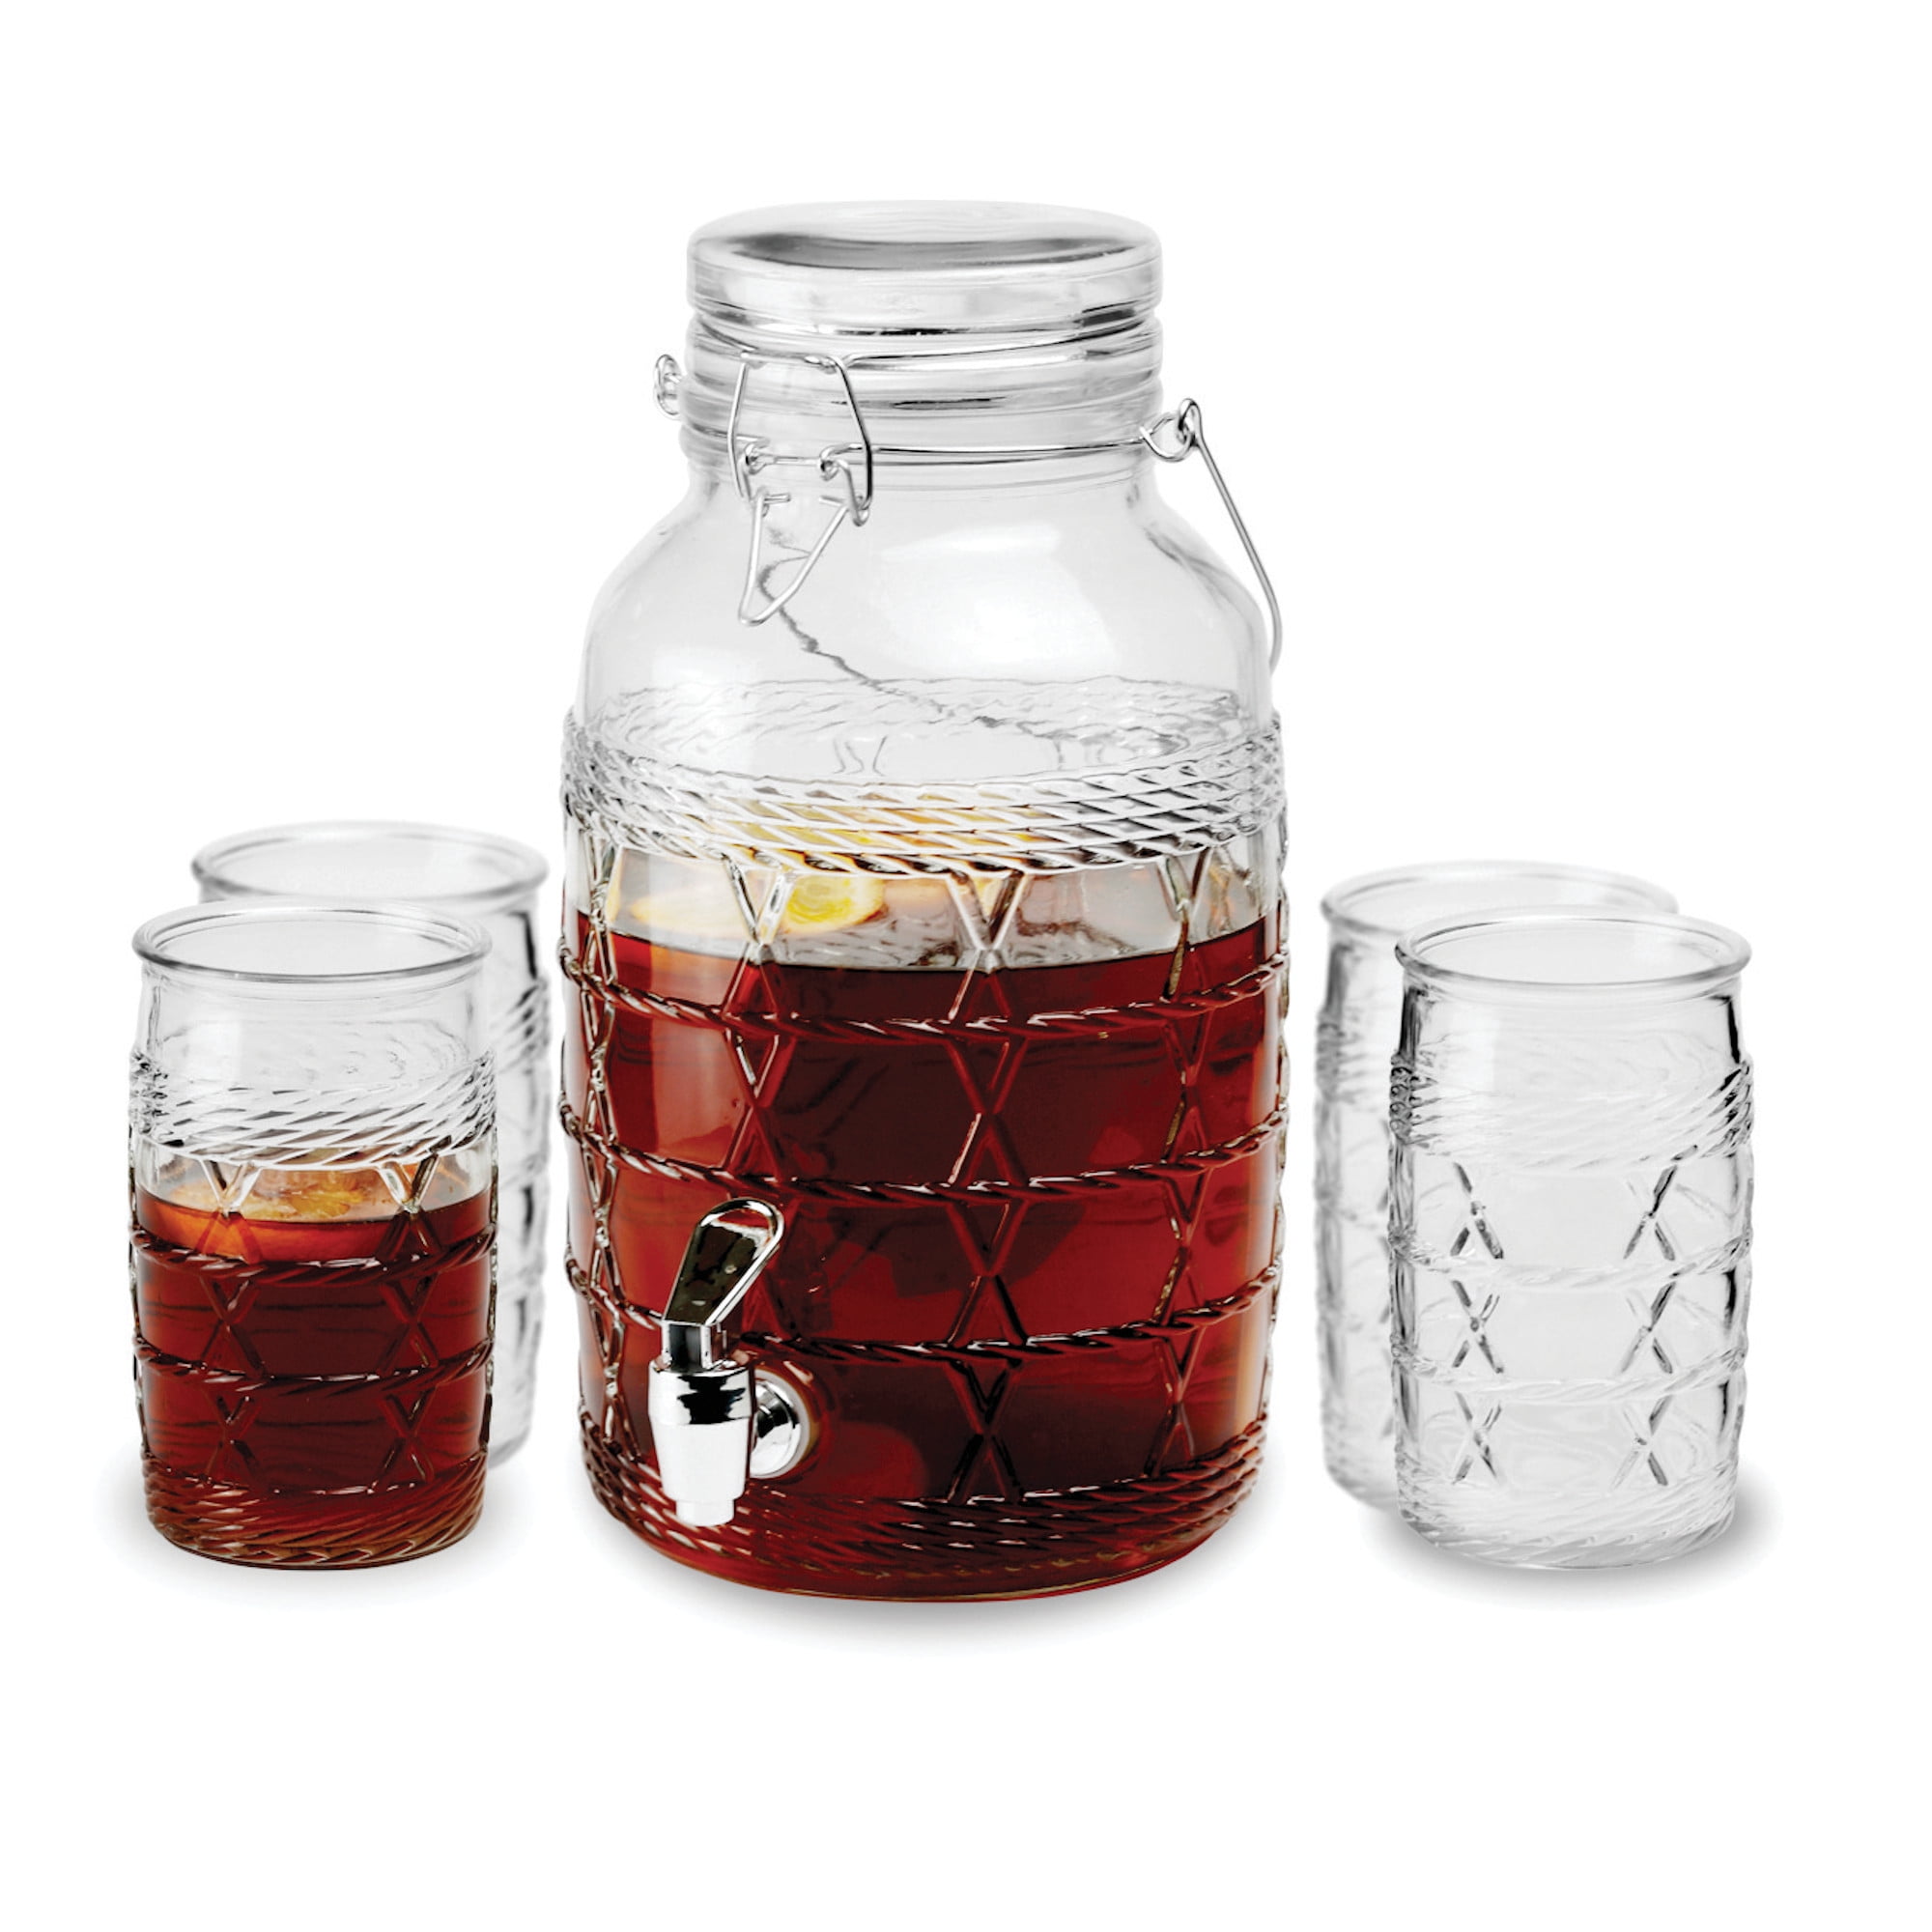 120 oz each Circleware 69310 Double Beverage Dispensers with Metal Stand Fun Sun Tea Party Entertainment Glassware Glass Water Pitcher for Iced Cold Punch Drinks Lancaster 